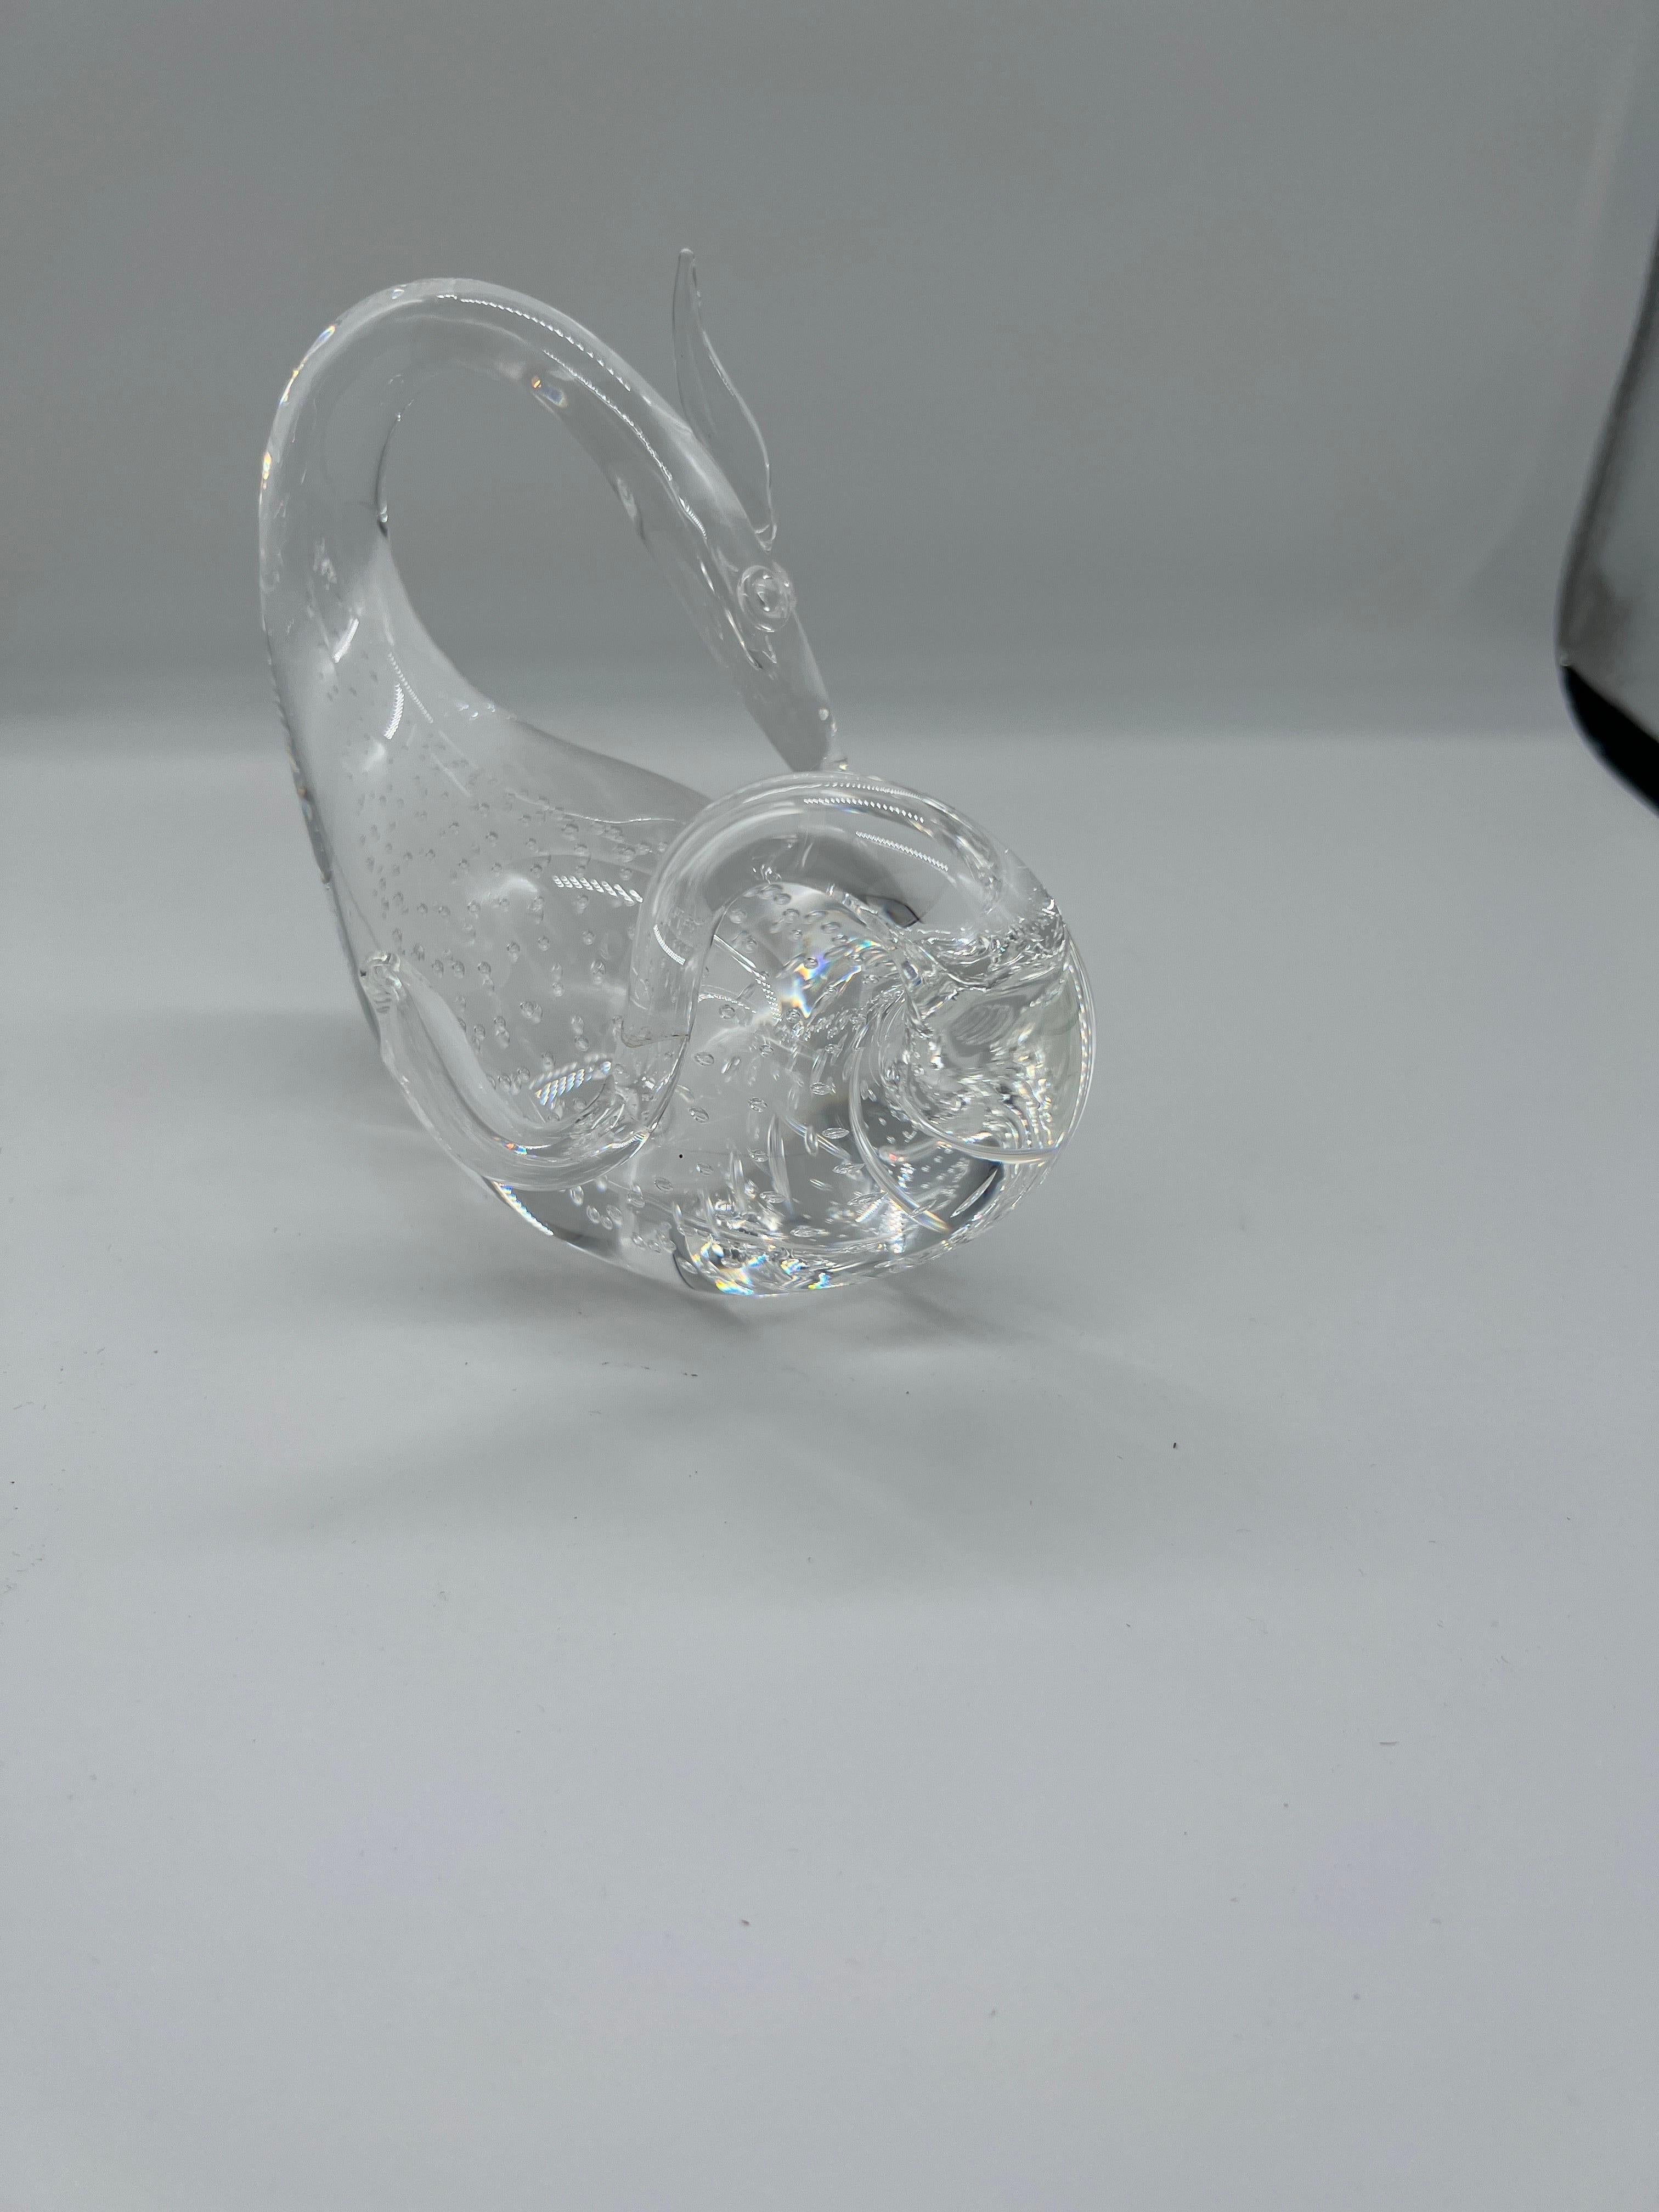 Steuben Controlled Bubble Crystal Dragon Figurine Designed by Bernard Wolff. 
This stunning crystal figure is made by the famous Steuben crystal company and has a completely handblown organic form with a controlled bubble interior. Signed to